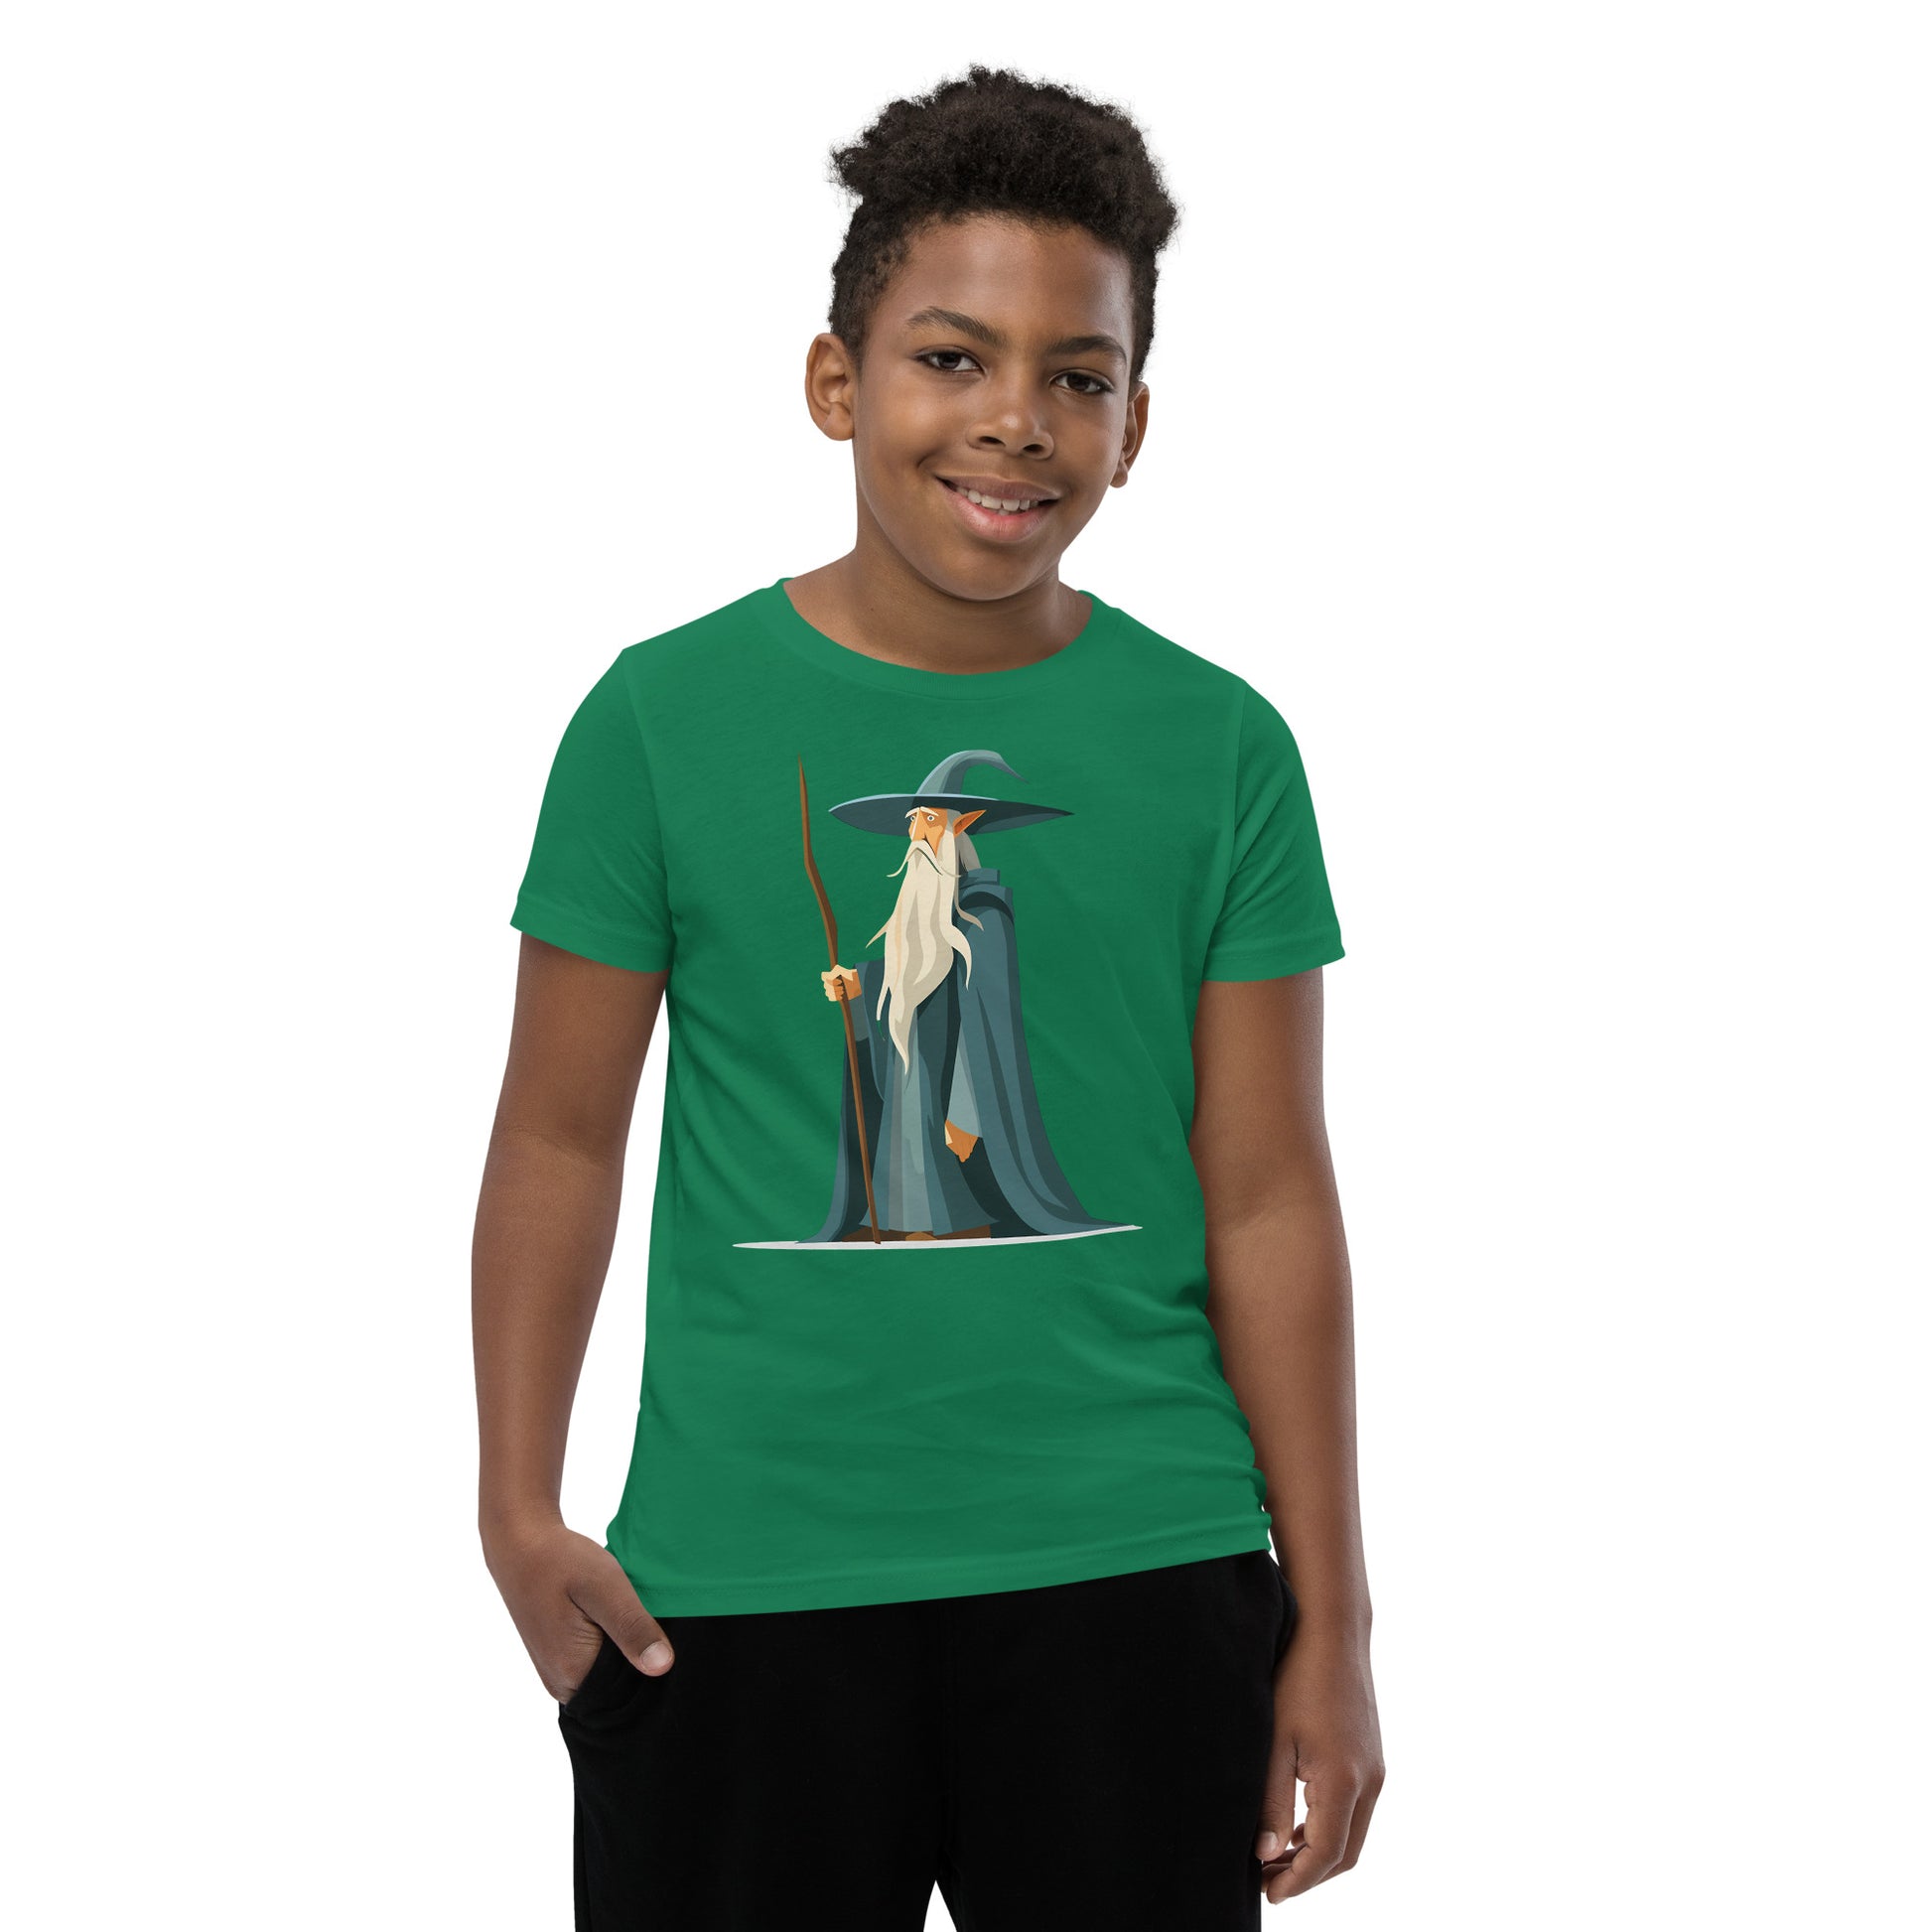 Boy with a green T-shirt with a picture of a magician